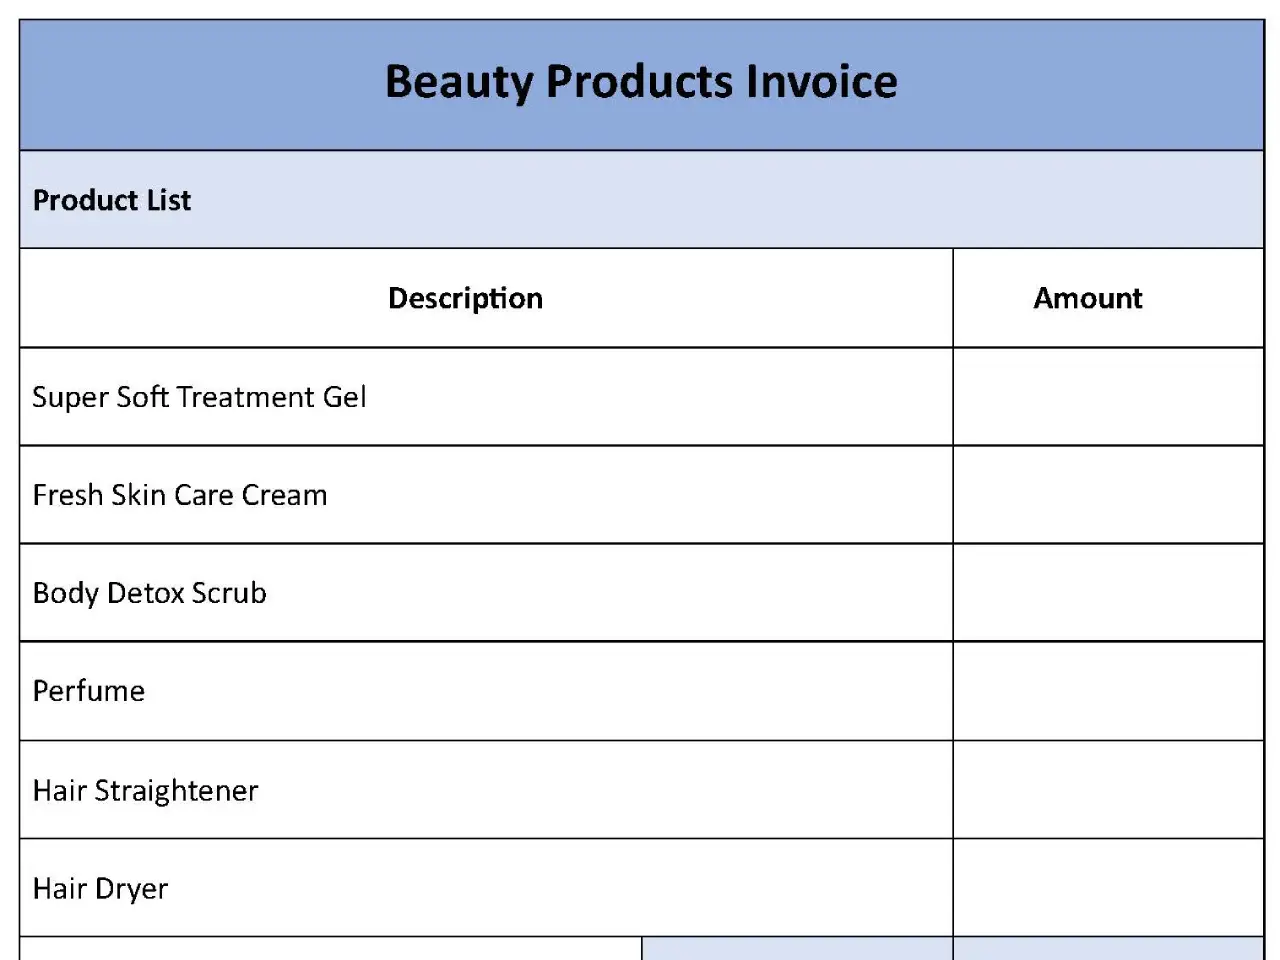 Beauty Products Invoice Form